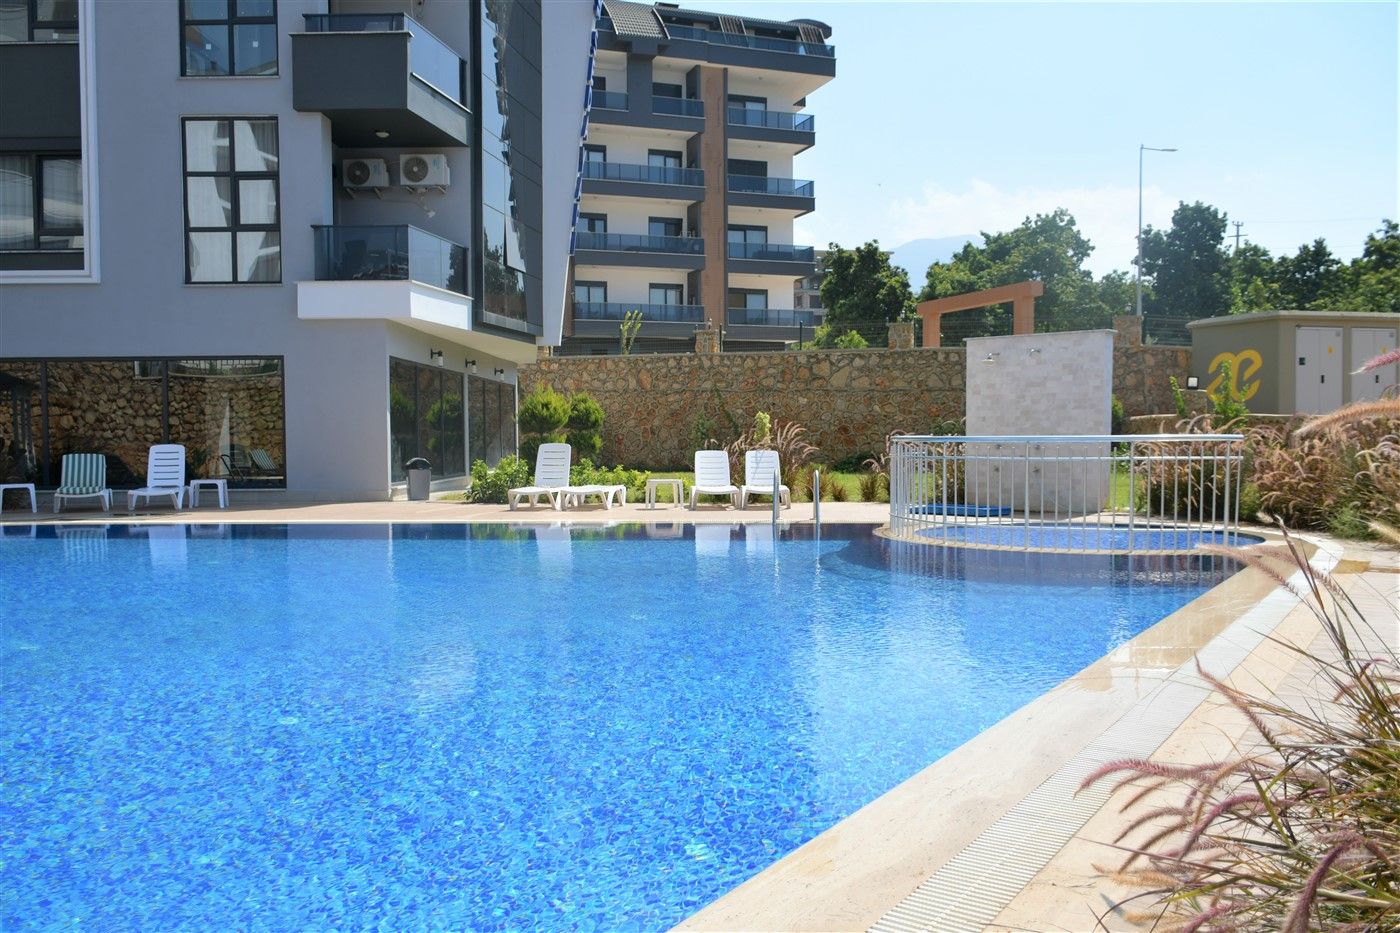 1-bedroom furnished apartment, new residential complex